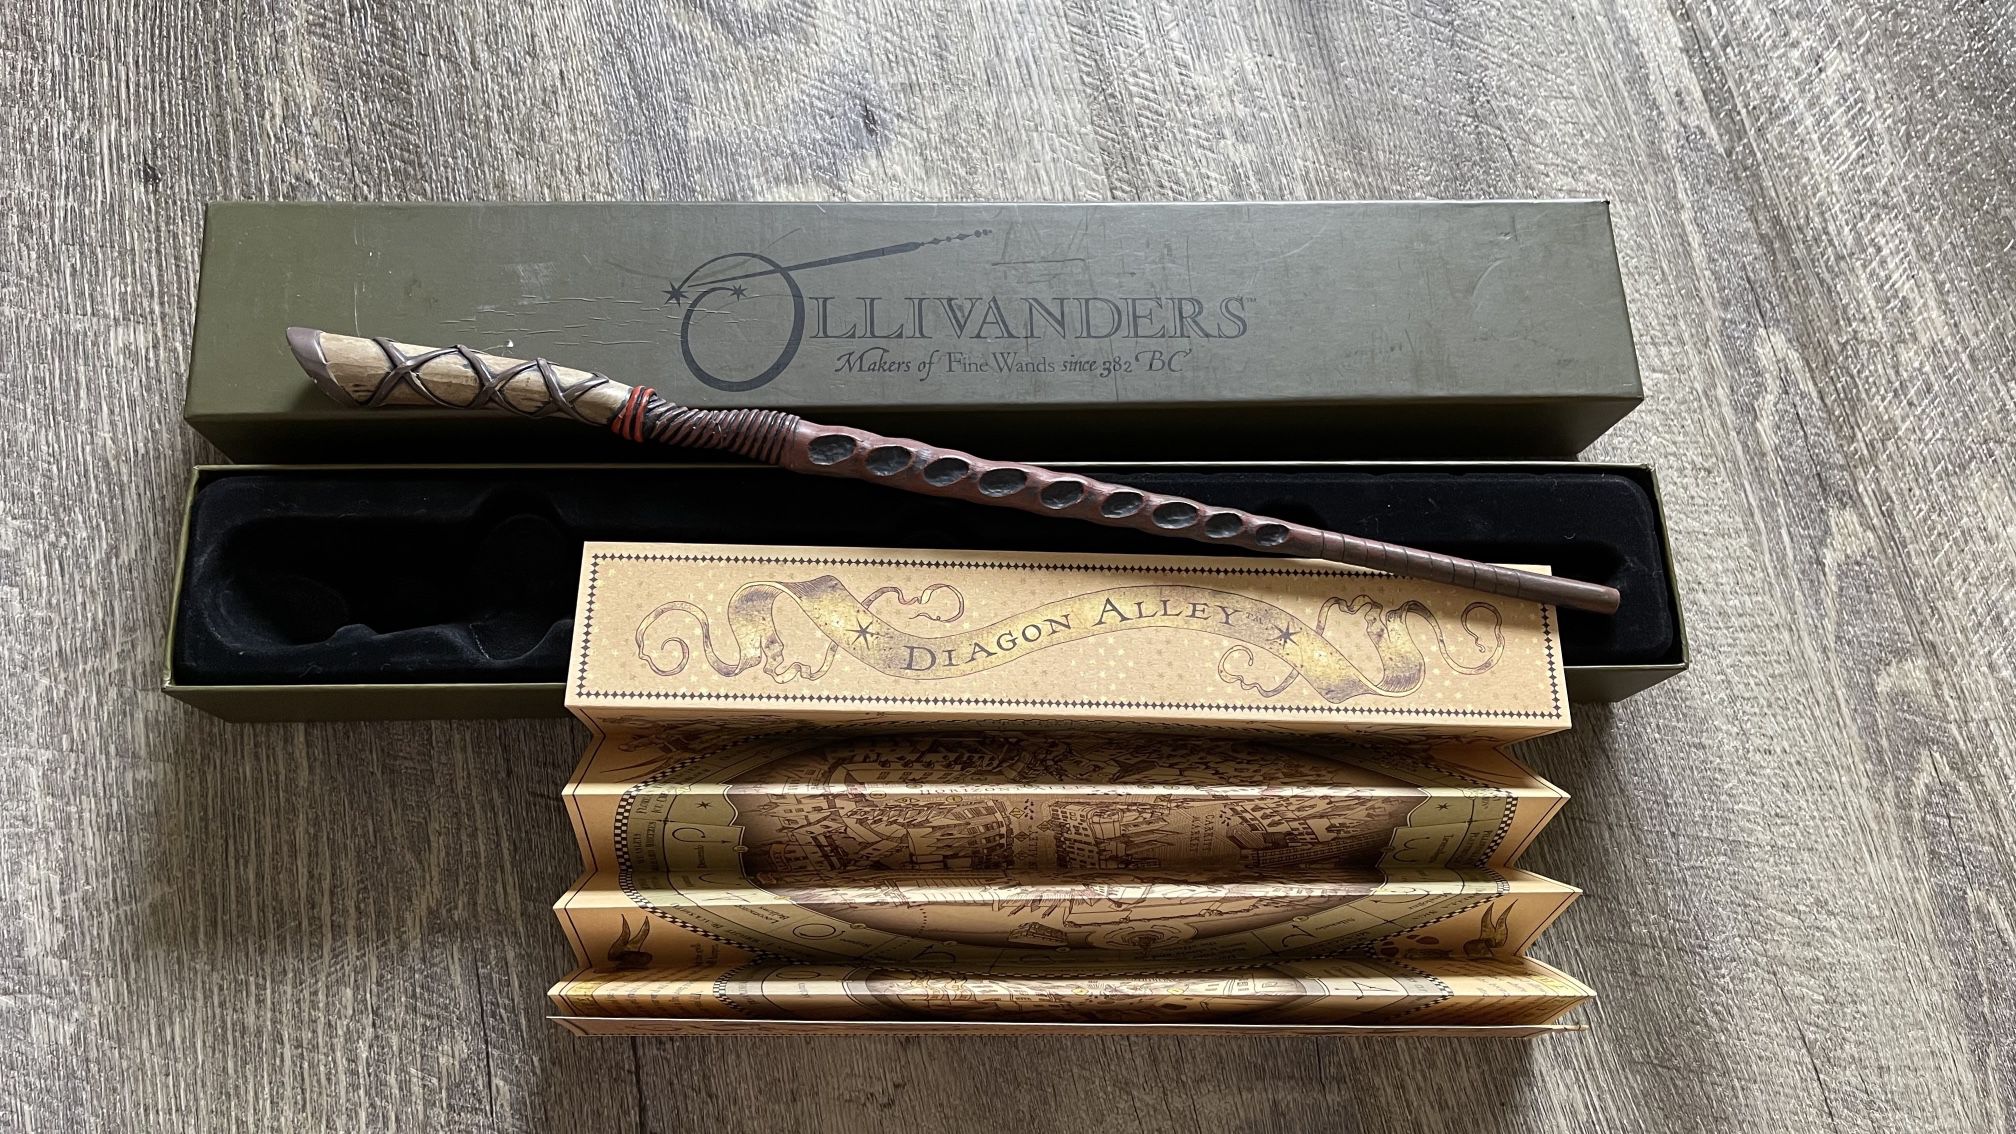 Harry Potter Interactive Wand - Ollivander's Holly 8 Wand 15", Authentic Wizarding World of HP